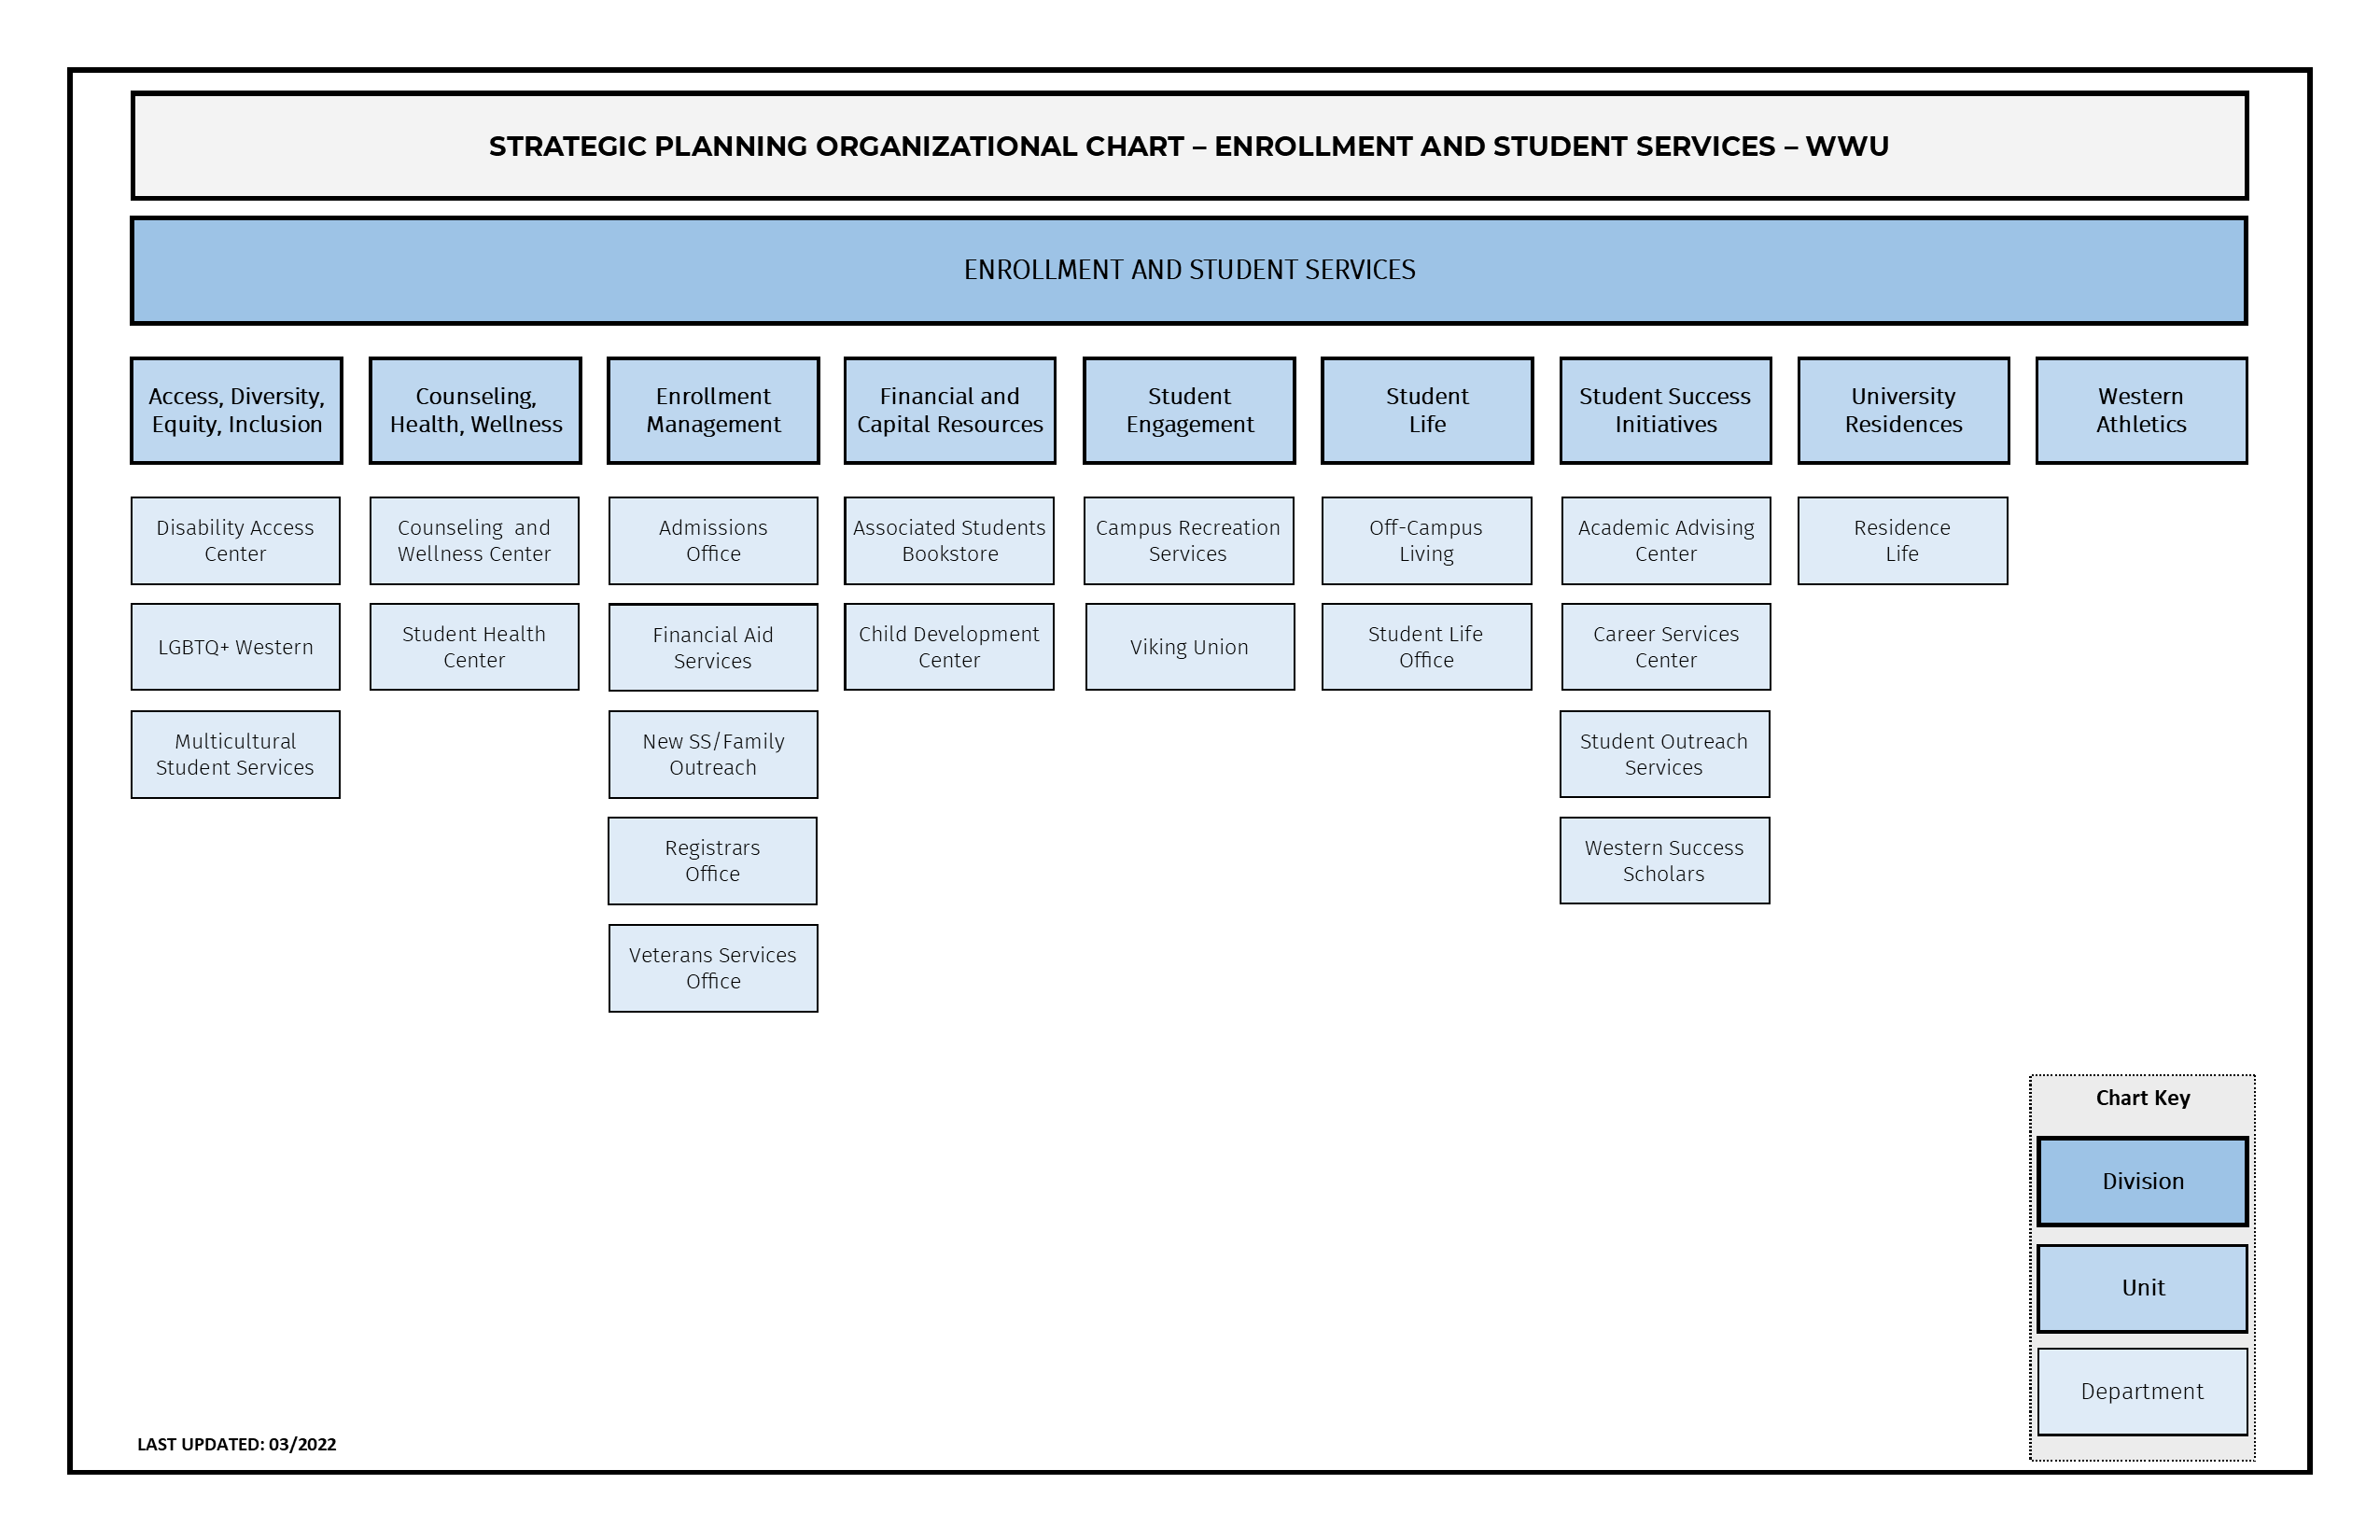 Strategic planning organizational chart for enrollment and student services detailed in text below